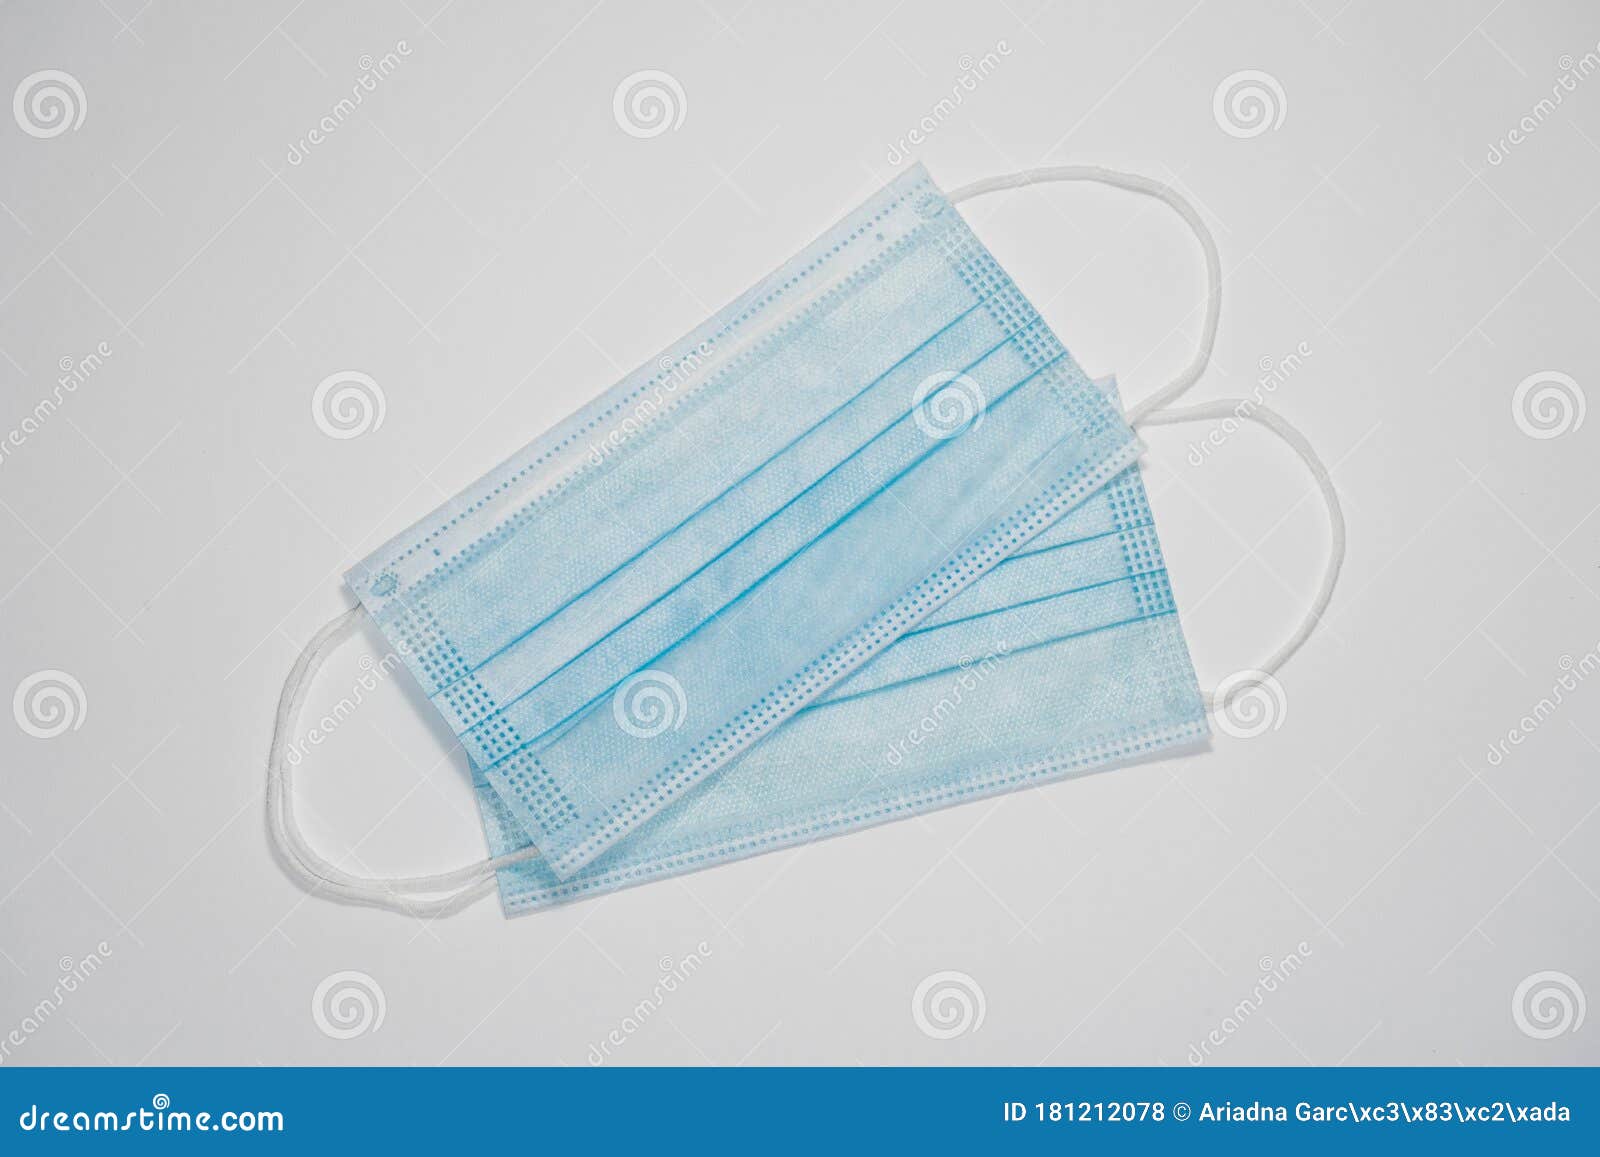 two face masks for virus protection on white background